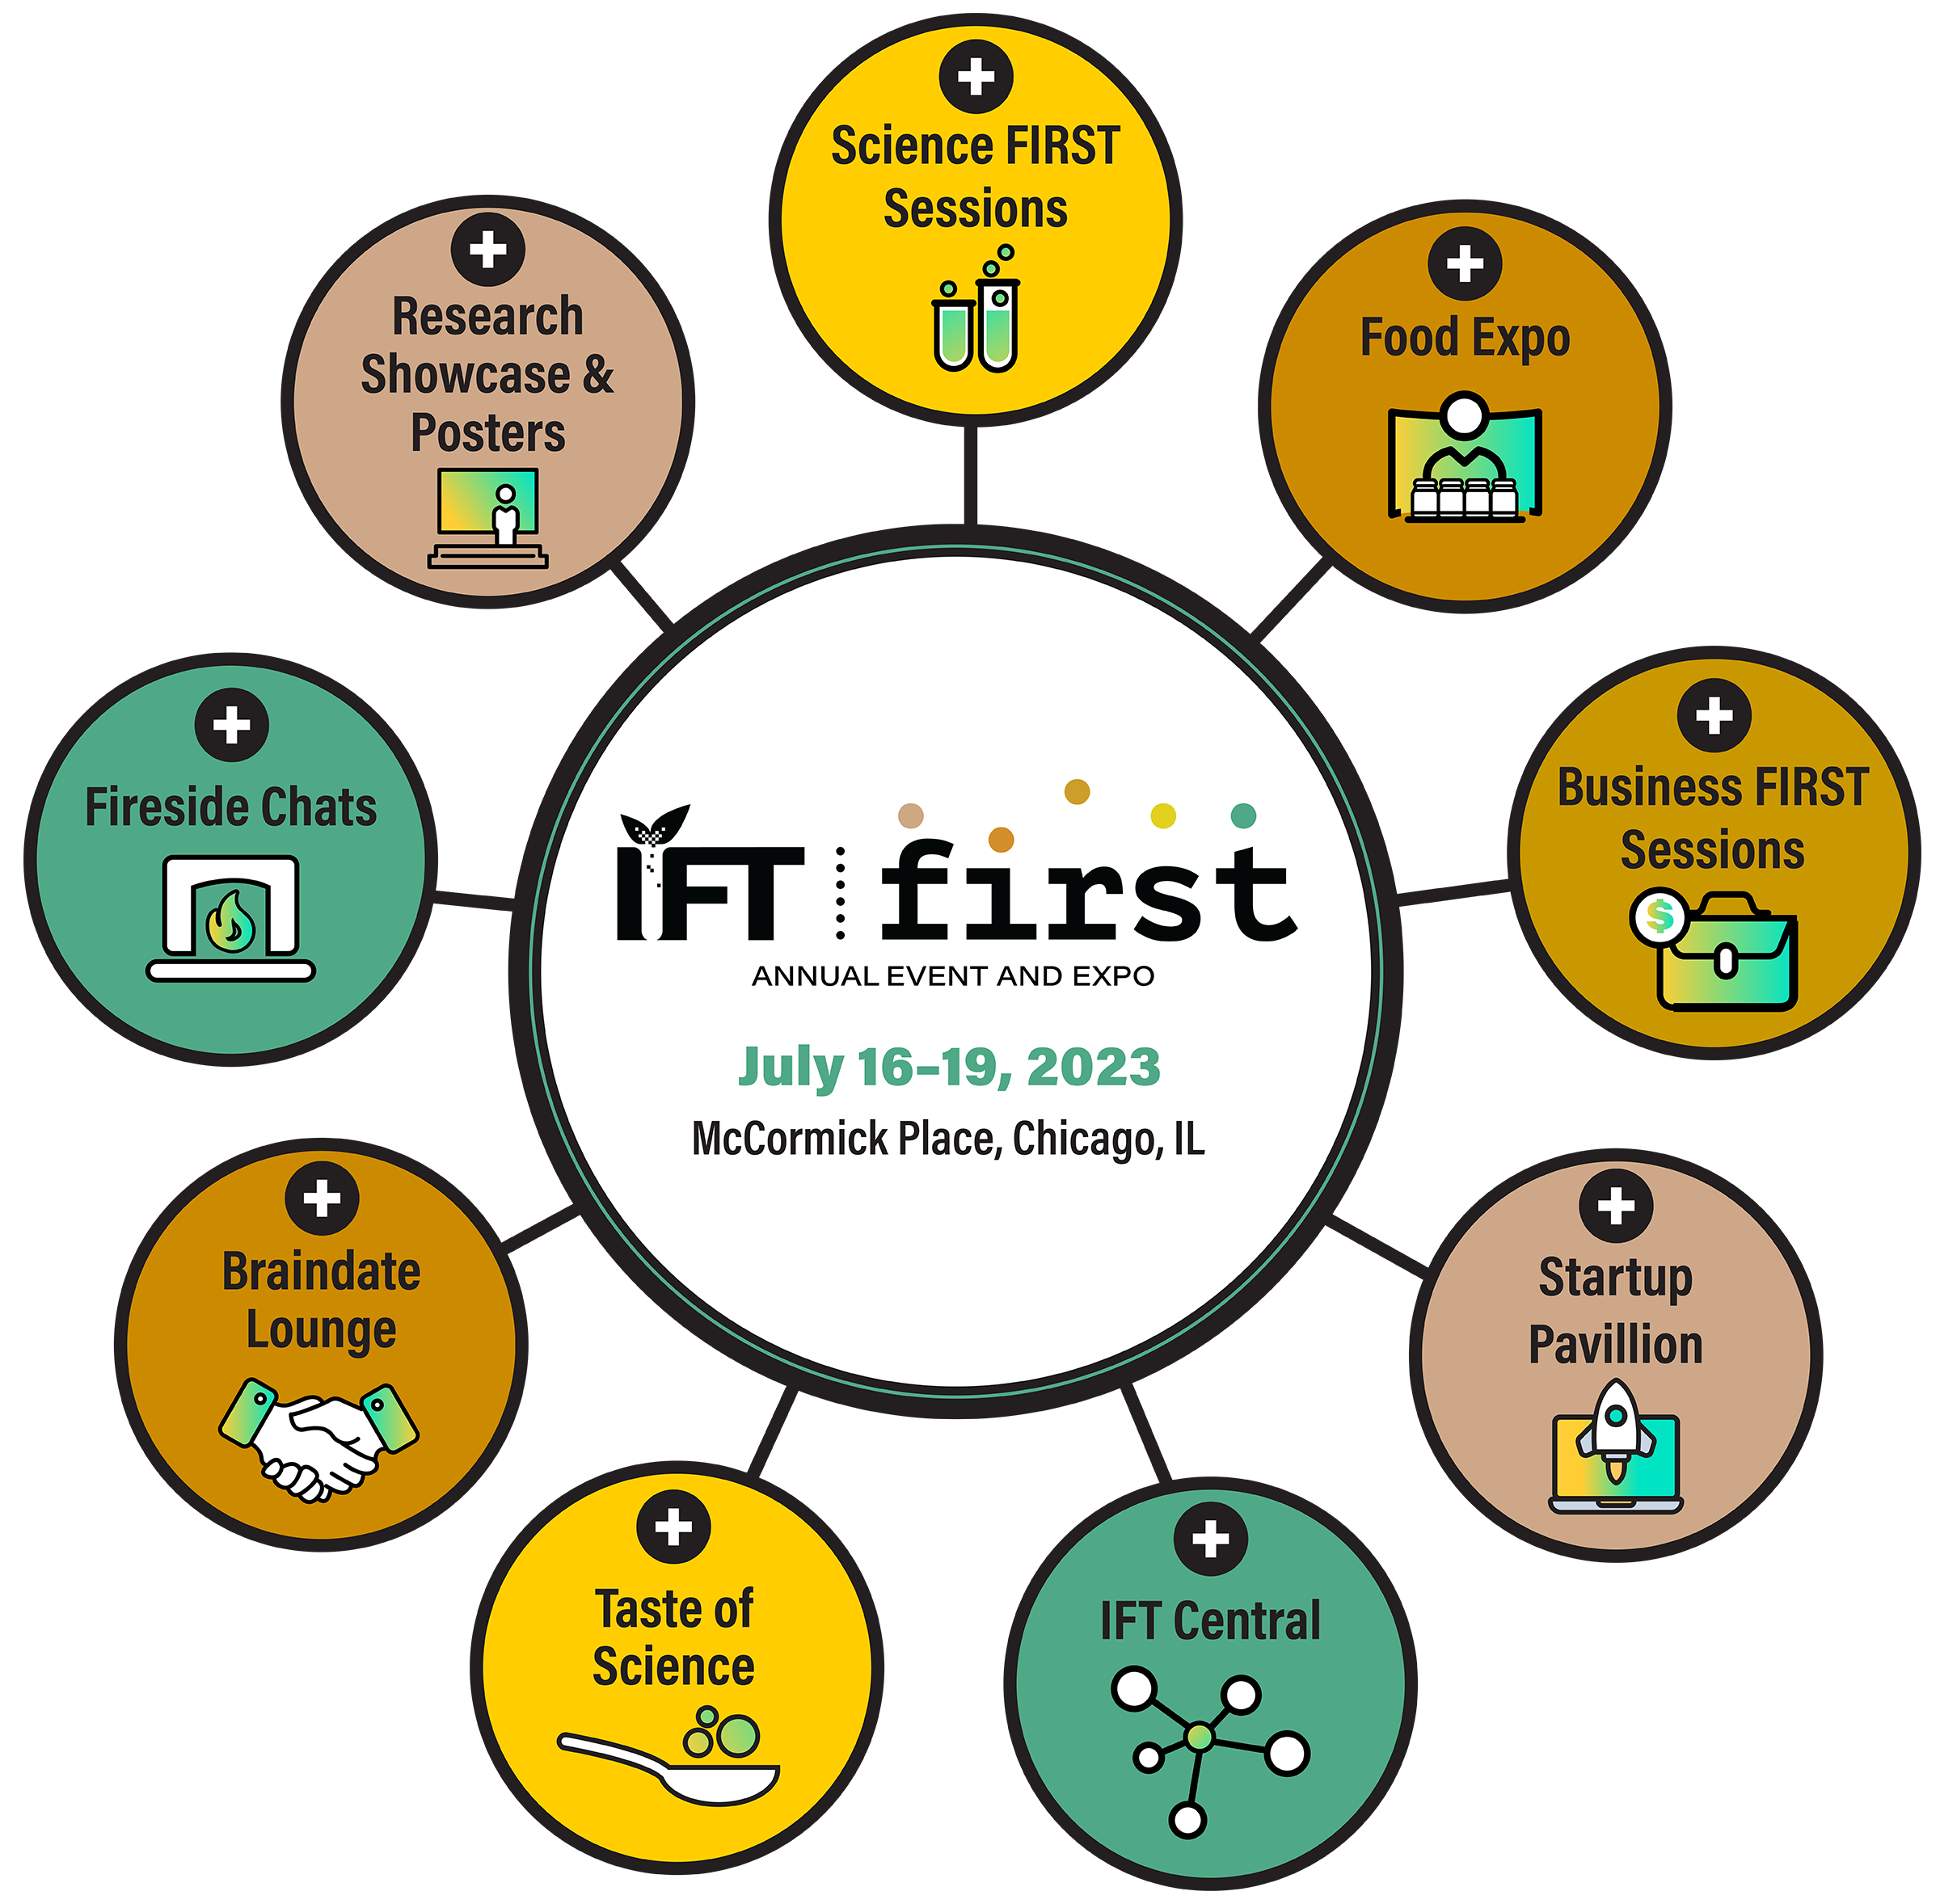 About IFT FIRST